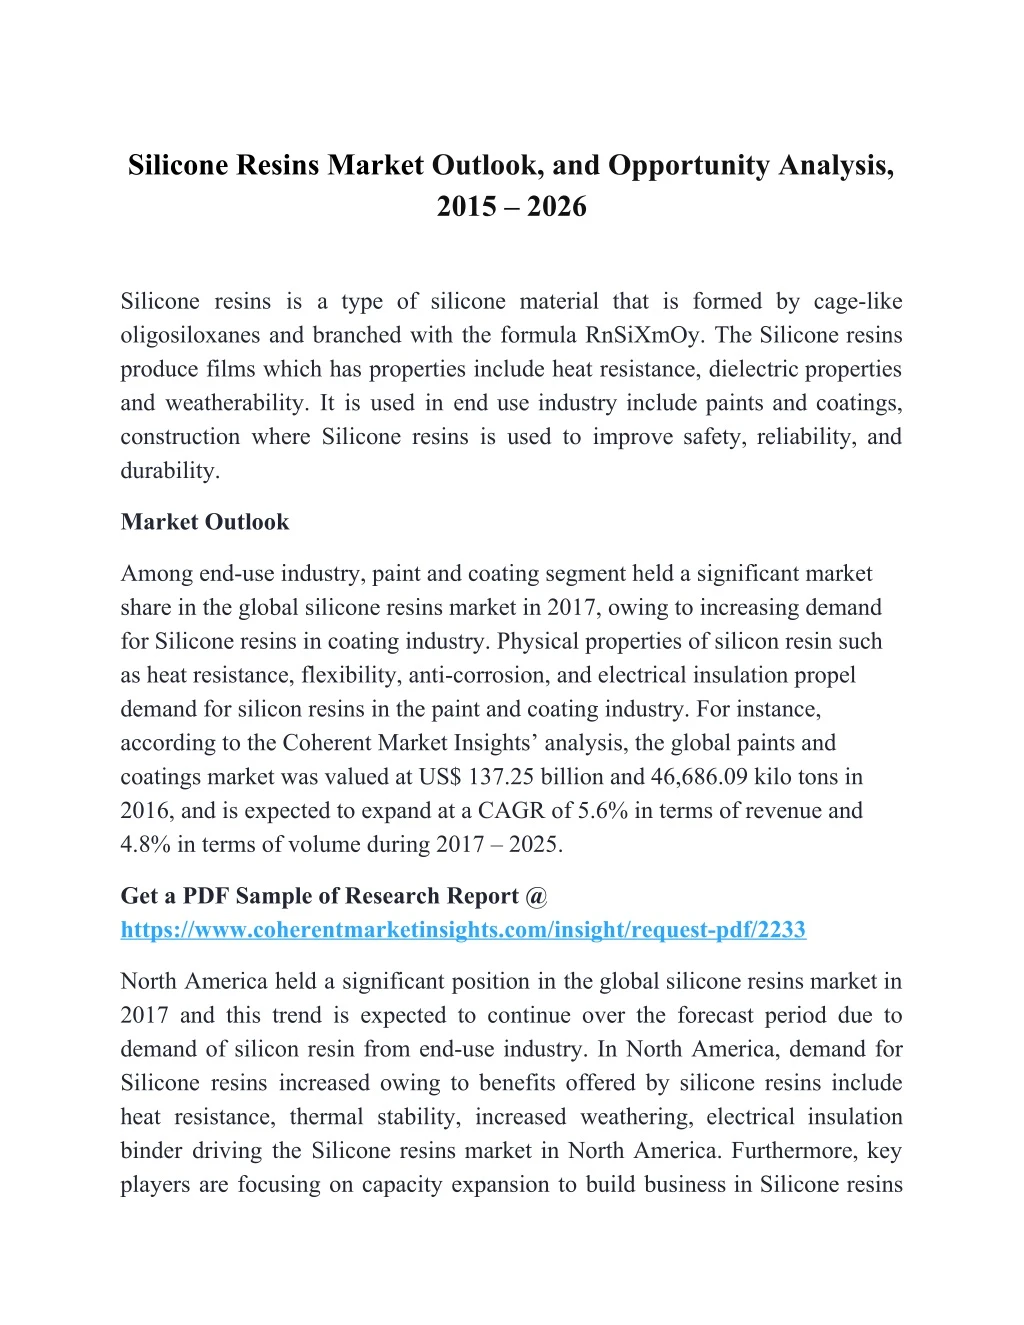 silicone resins market outlook and opportunity